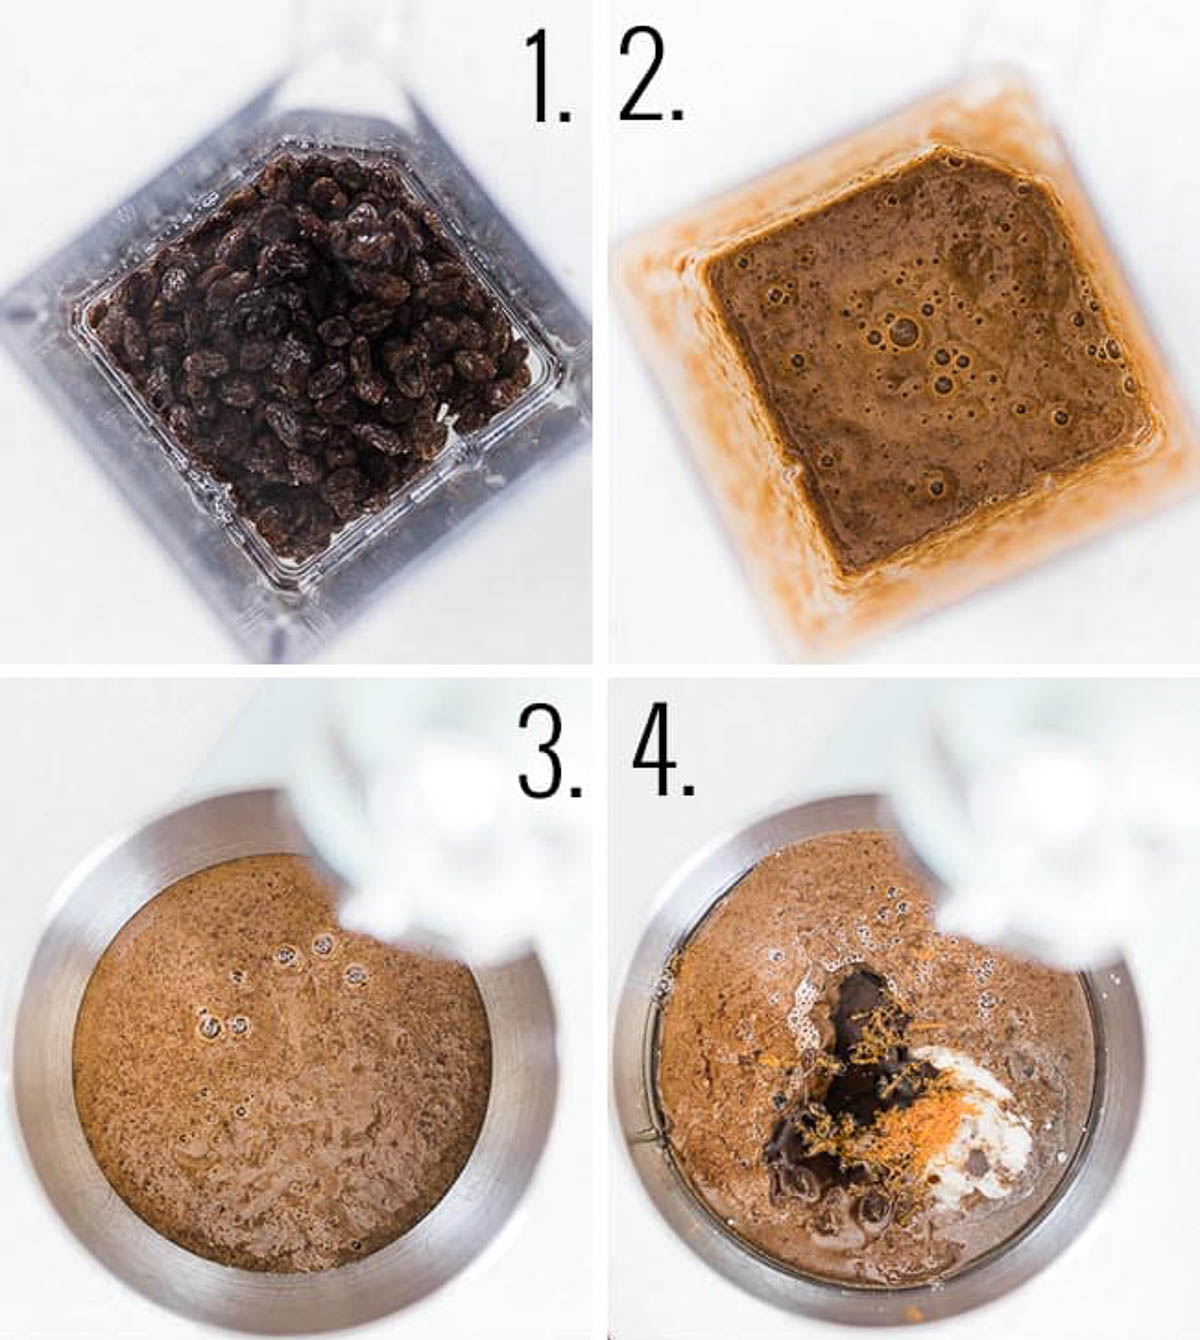 Collage of image showing how to mix up molasses bran muffins.